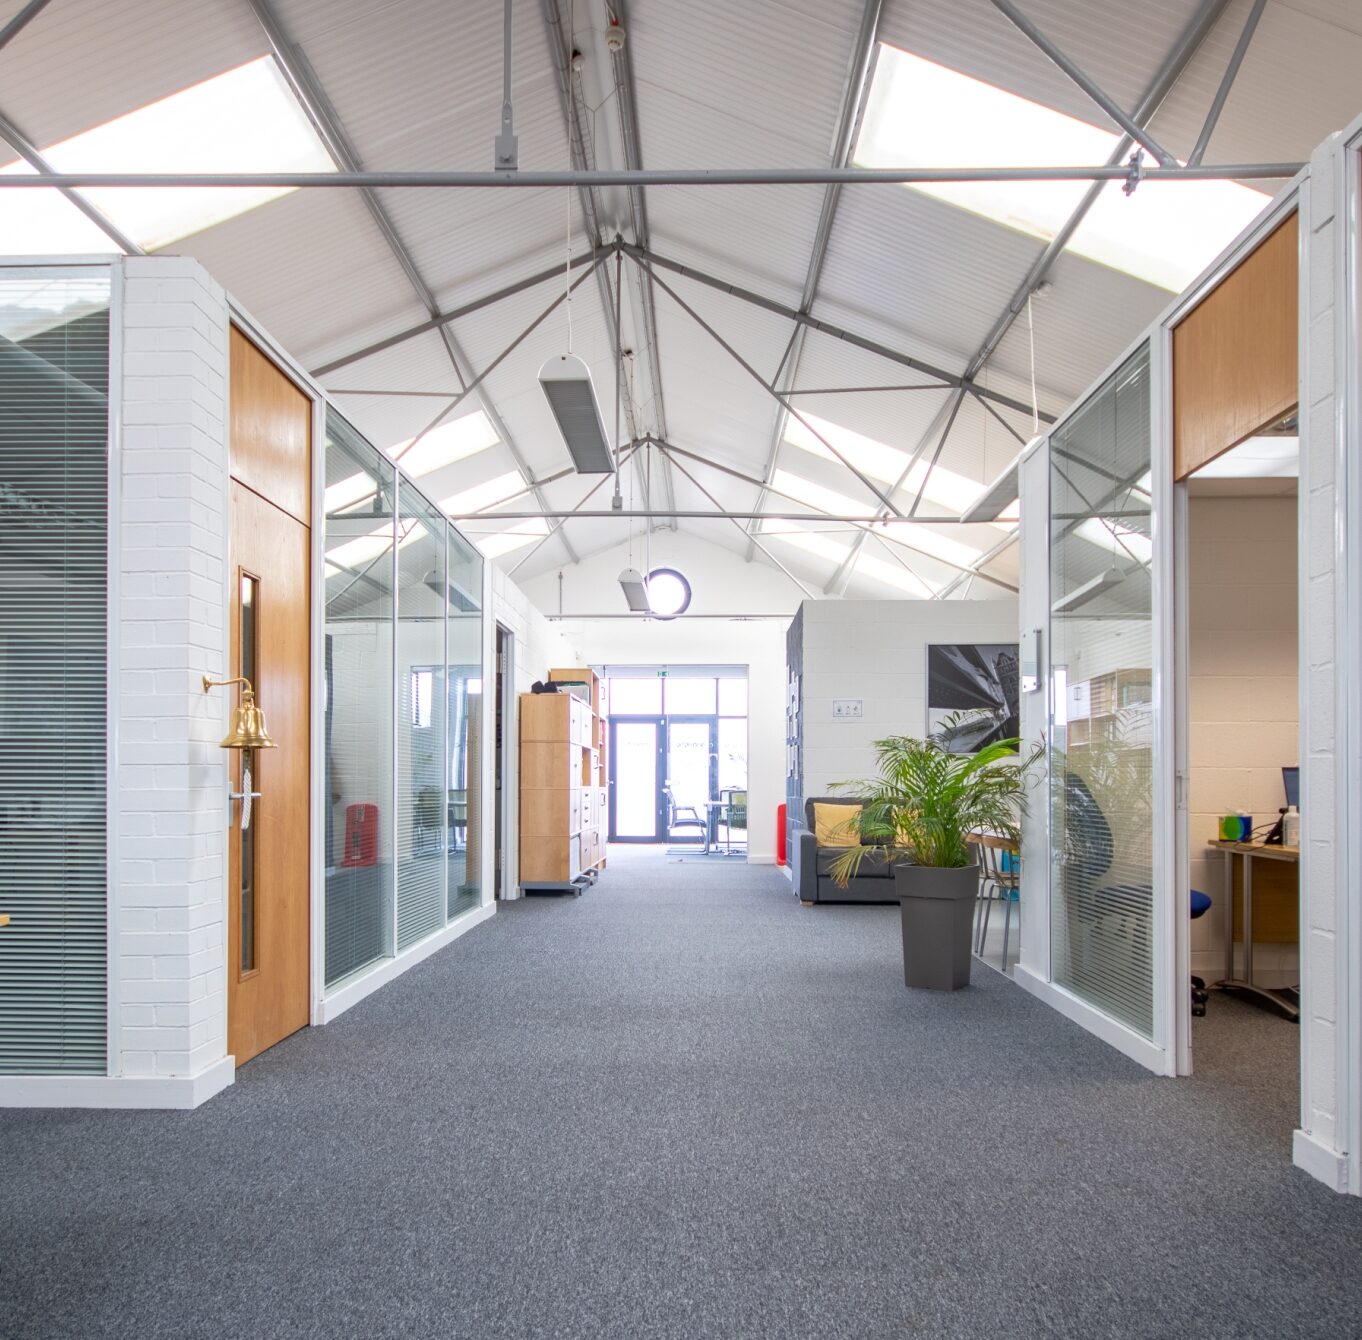 Elcot Park Offices to Let